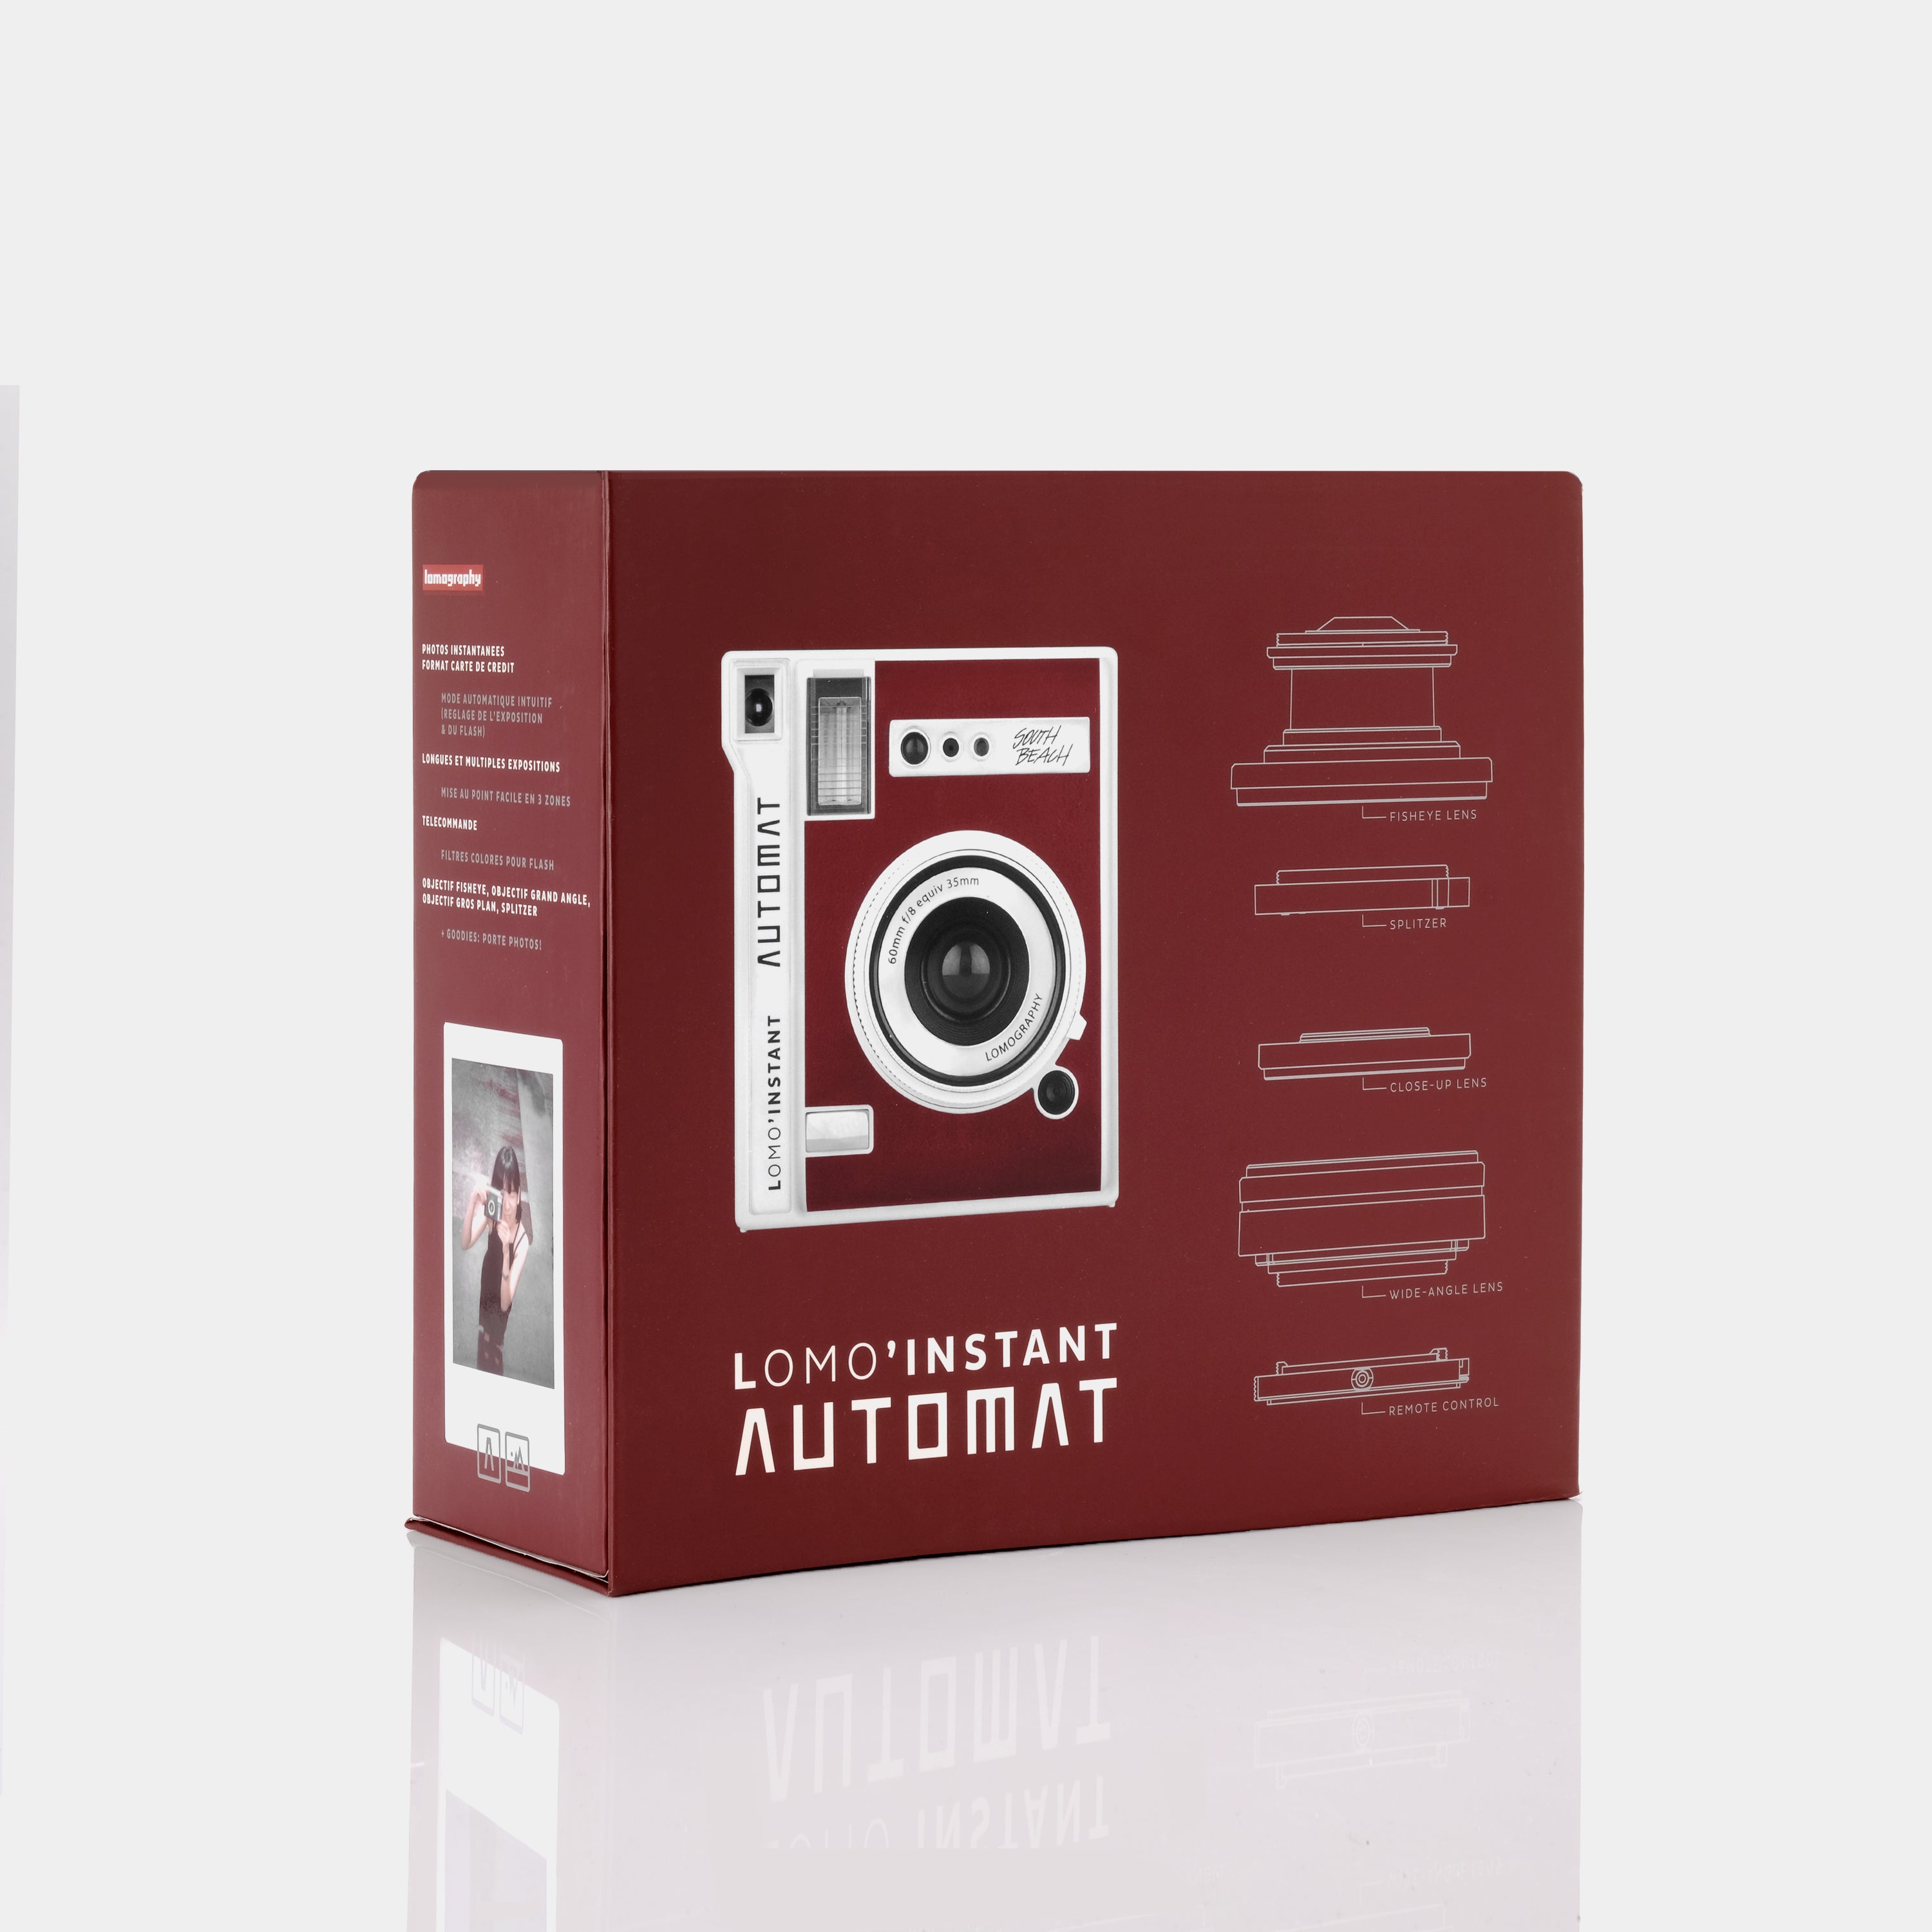 Lomography Lomo'Instant Automat (South Beach Edition) and Lenses Instax Mini Instant Film Camera